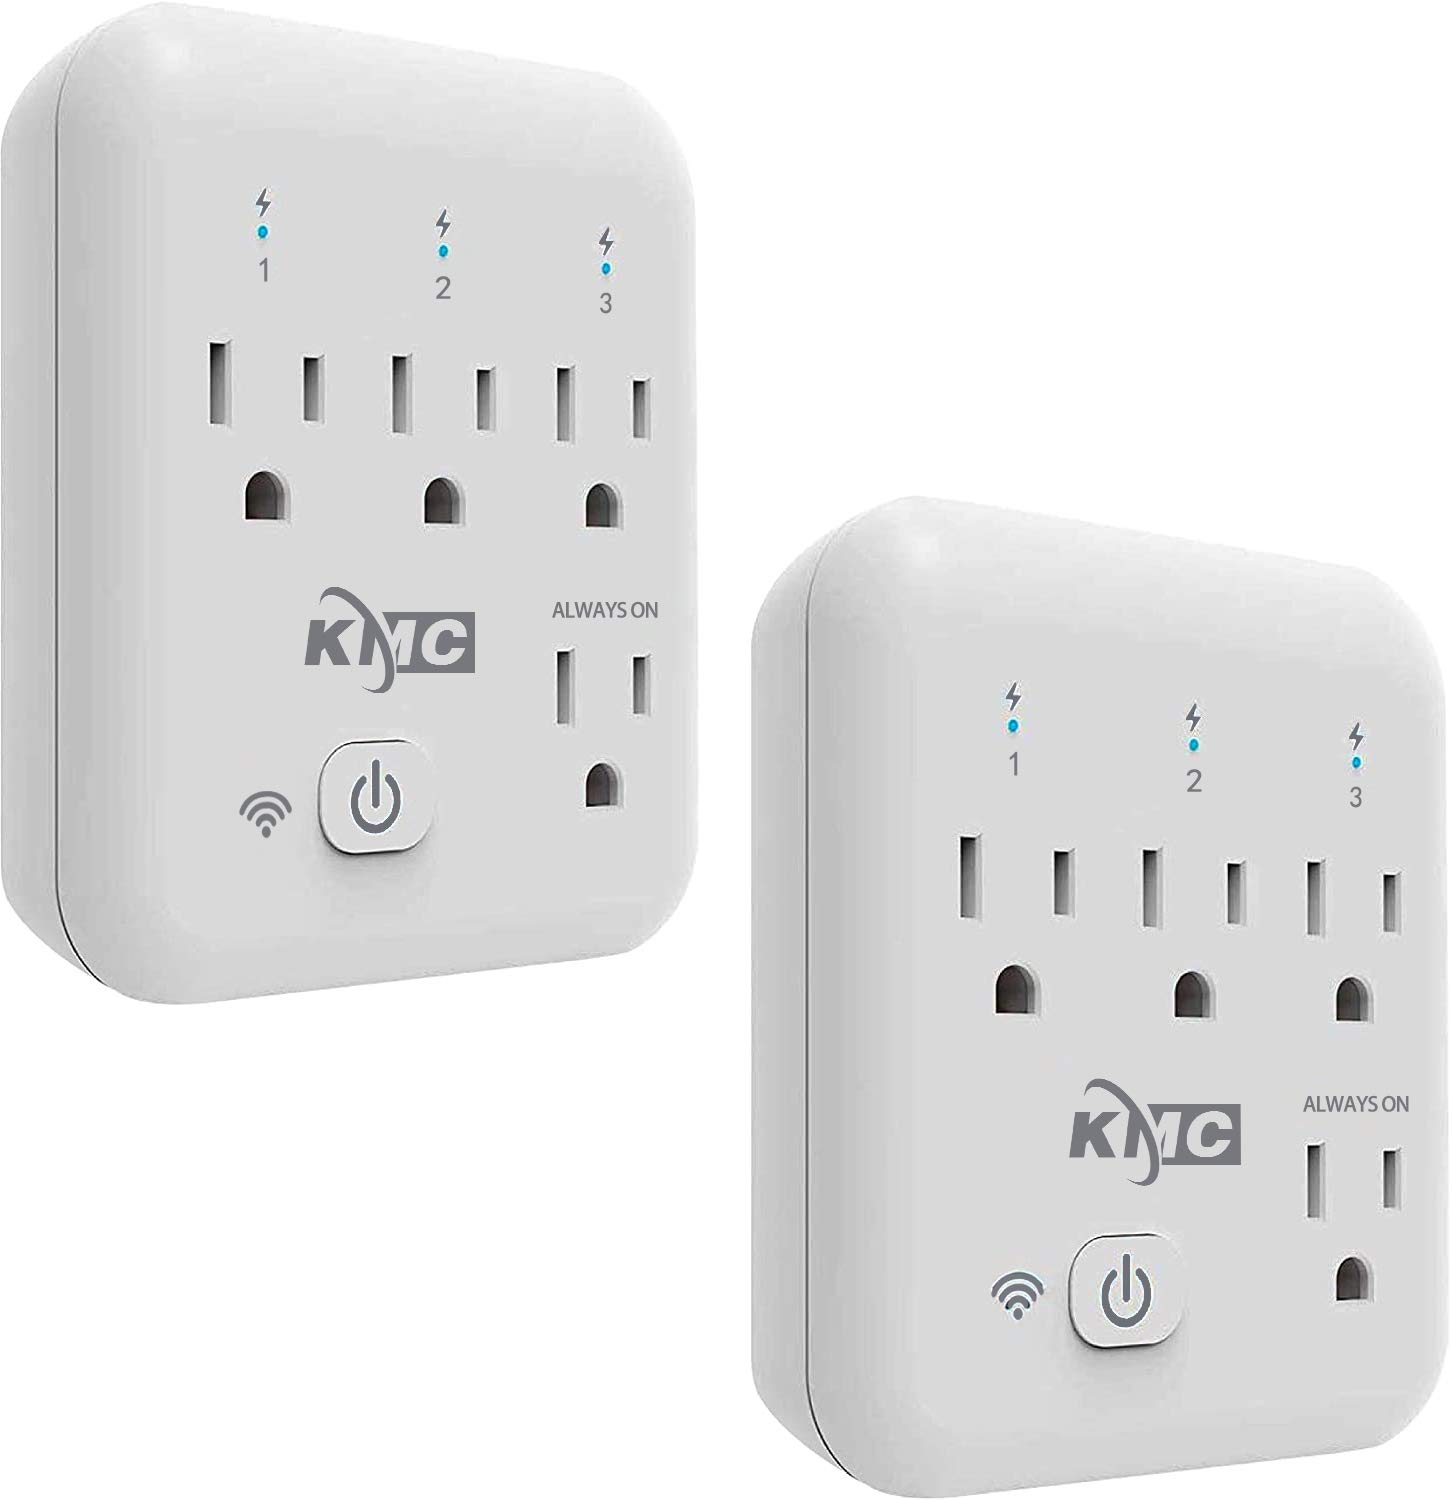 2-Pack KMC 4-Outlet WiFi Mini Smart Plug w/ Energy Monitoring $18.69